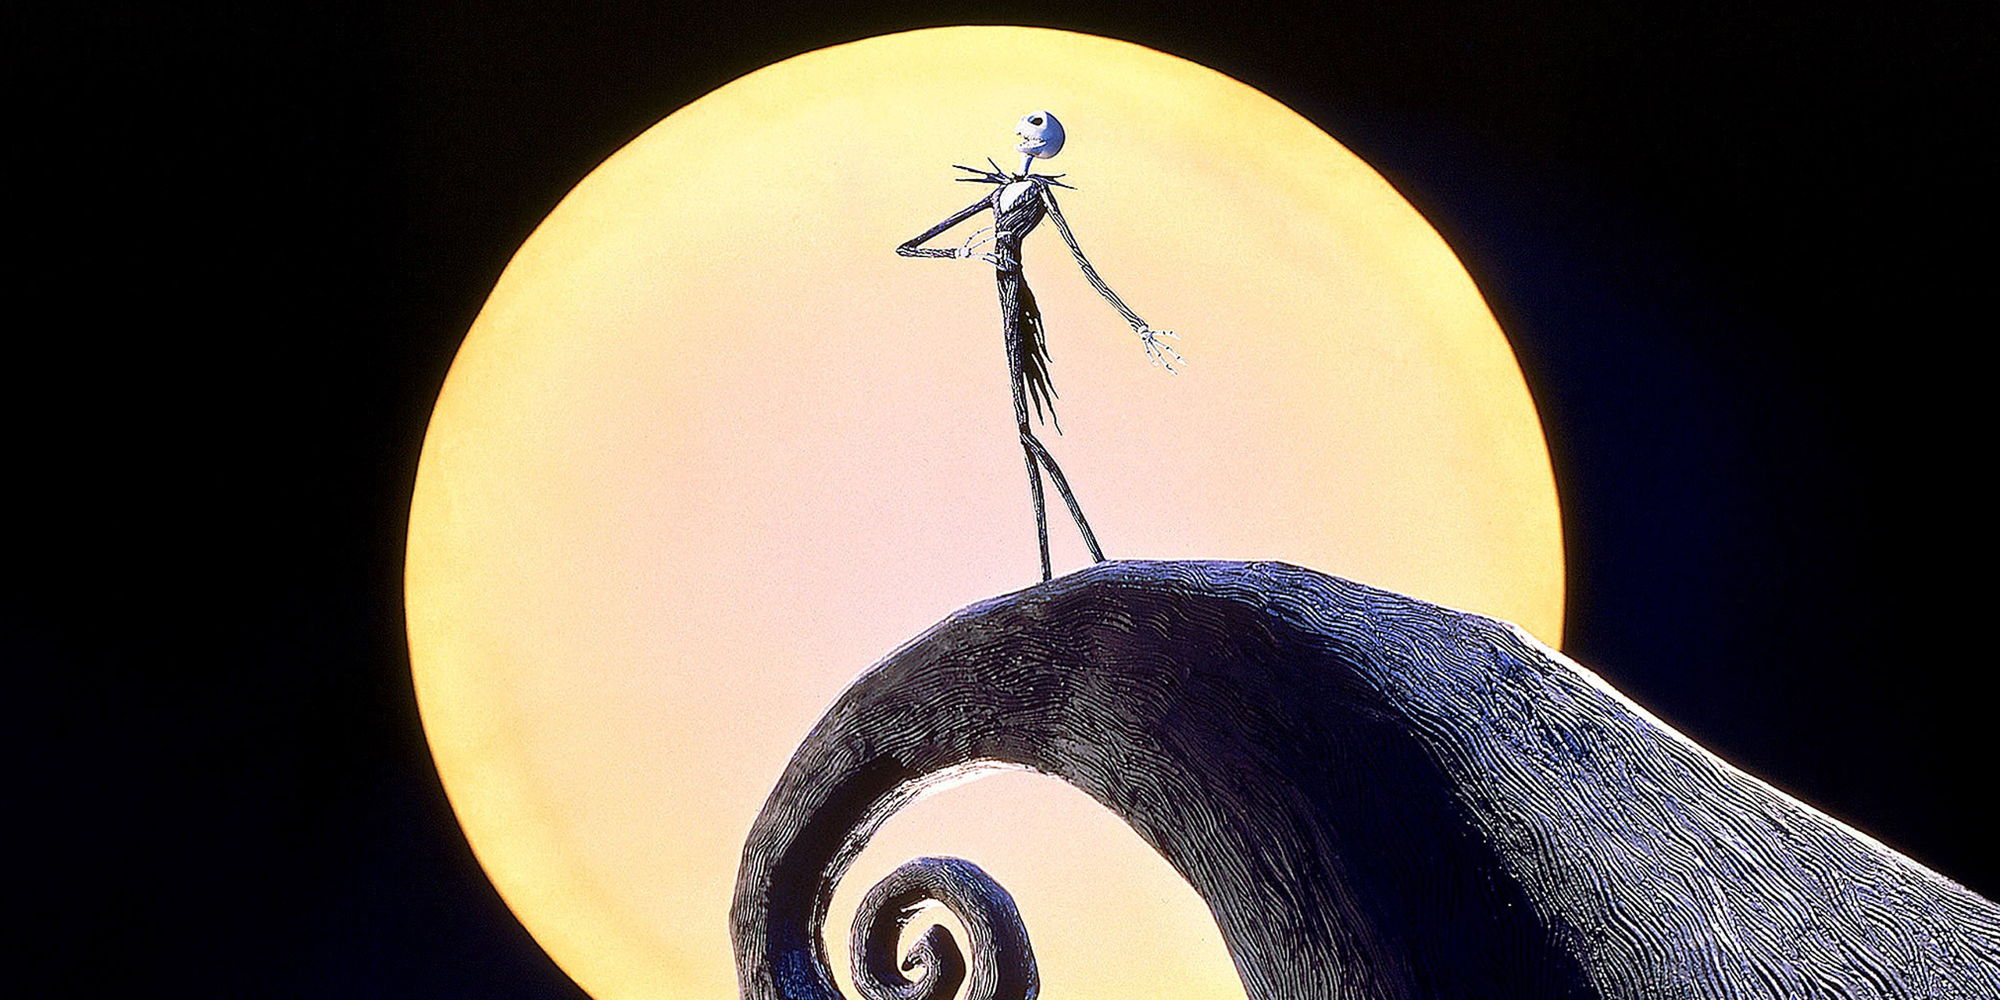 The Nightmare Before Christmas promotional image